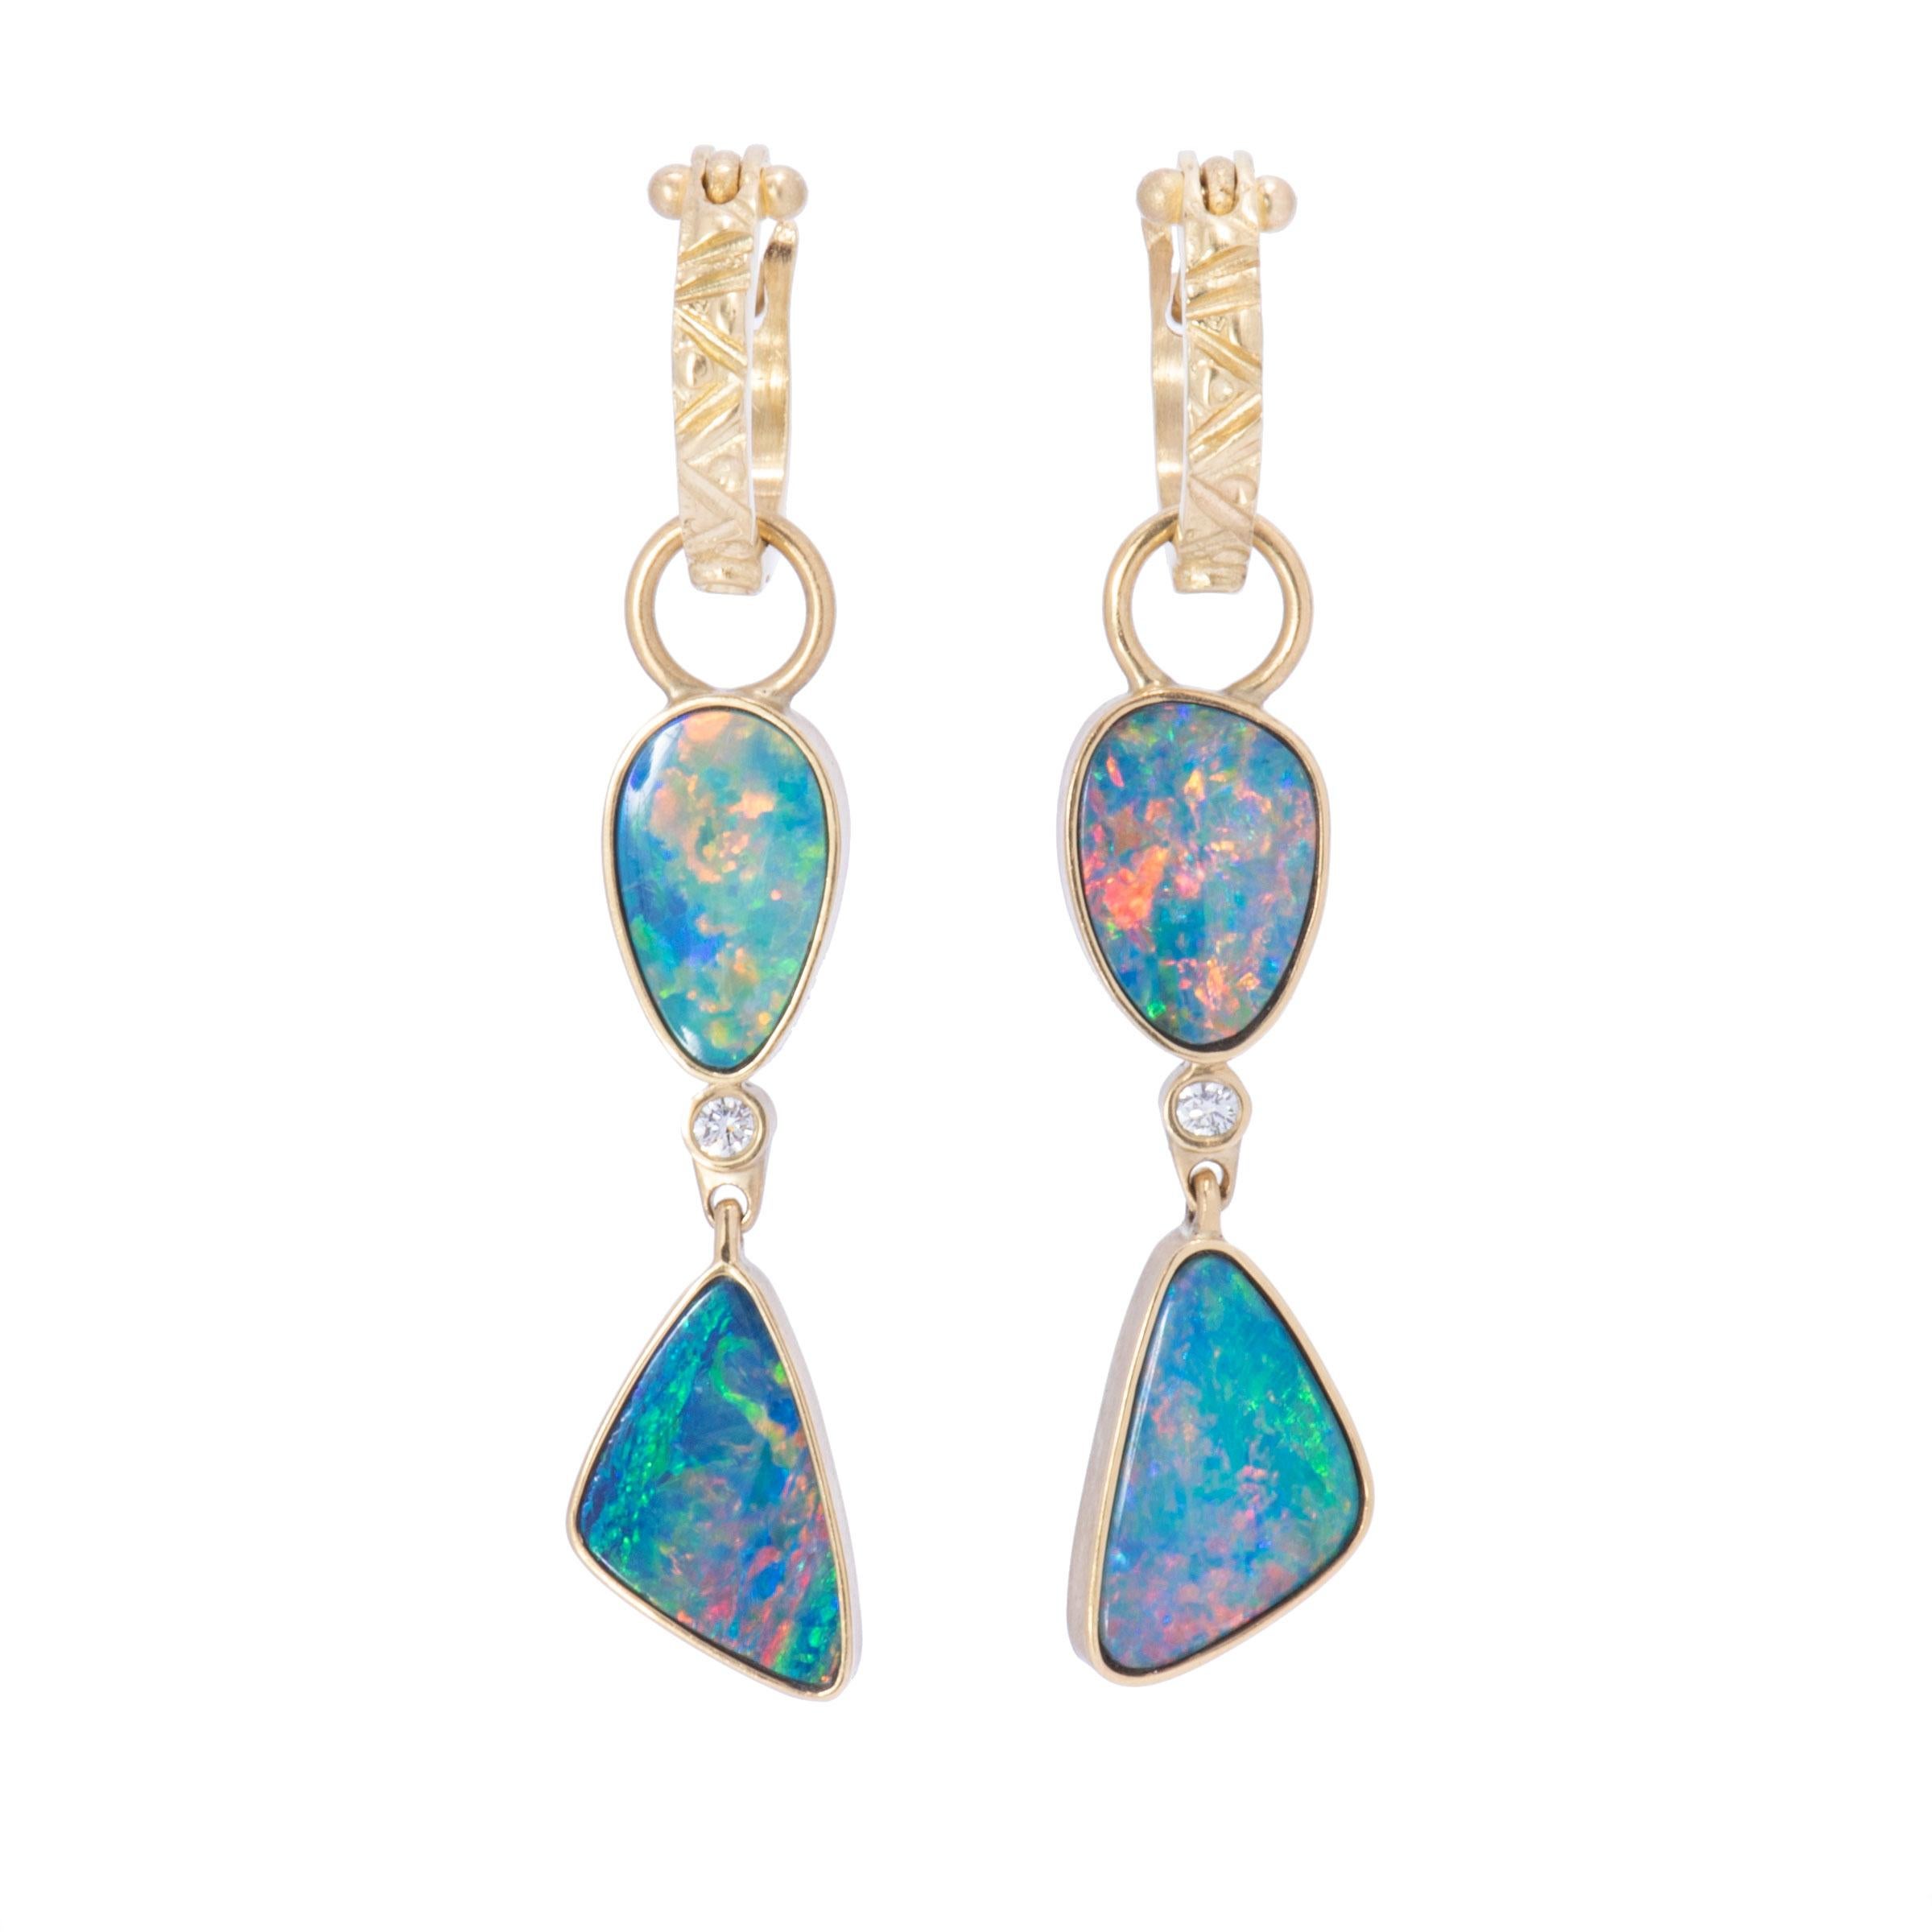 Dreamy blue green Boulder Opals flash with orange and yellow fire in two-tiered drop earrings. Enhanced with .08tcw white diamonds, these two-tiered drop earrings hang from 18 karat gold small galaxy hoops in 18 karat gold. Measuring 1.75